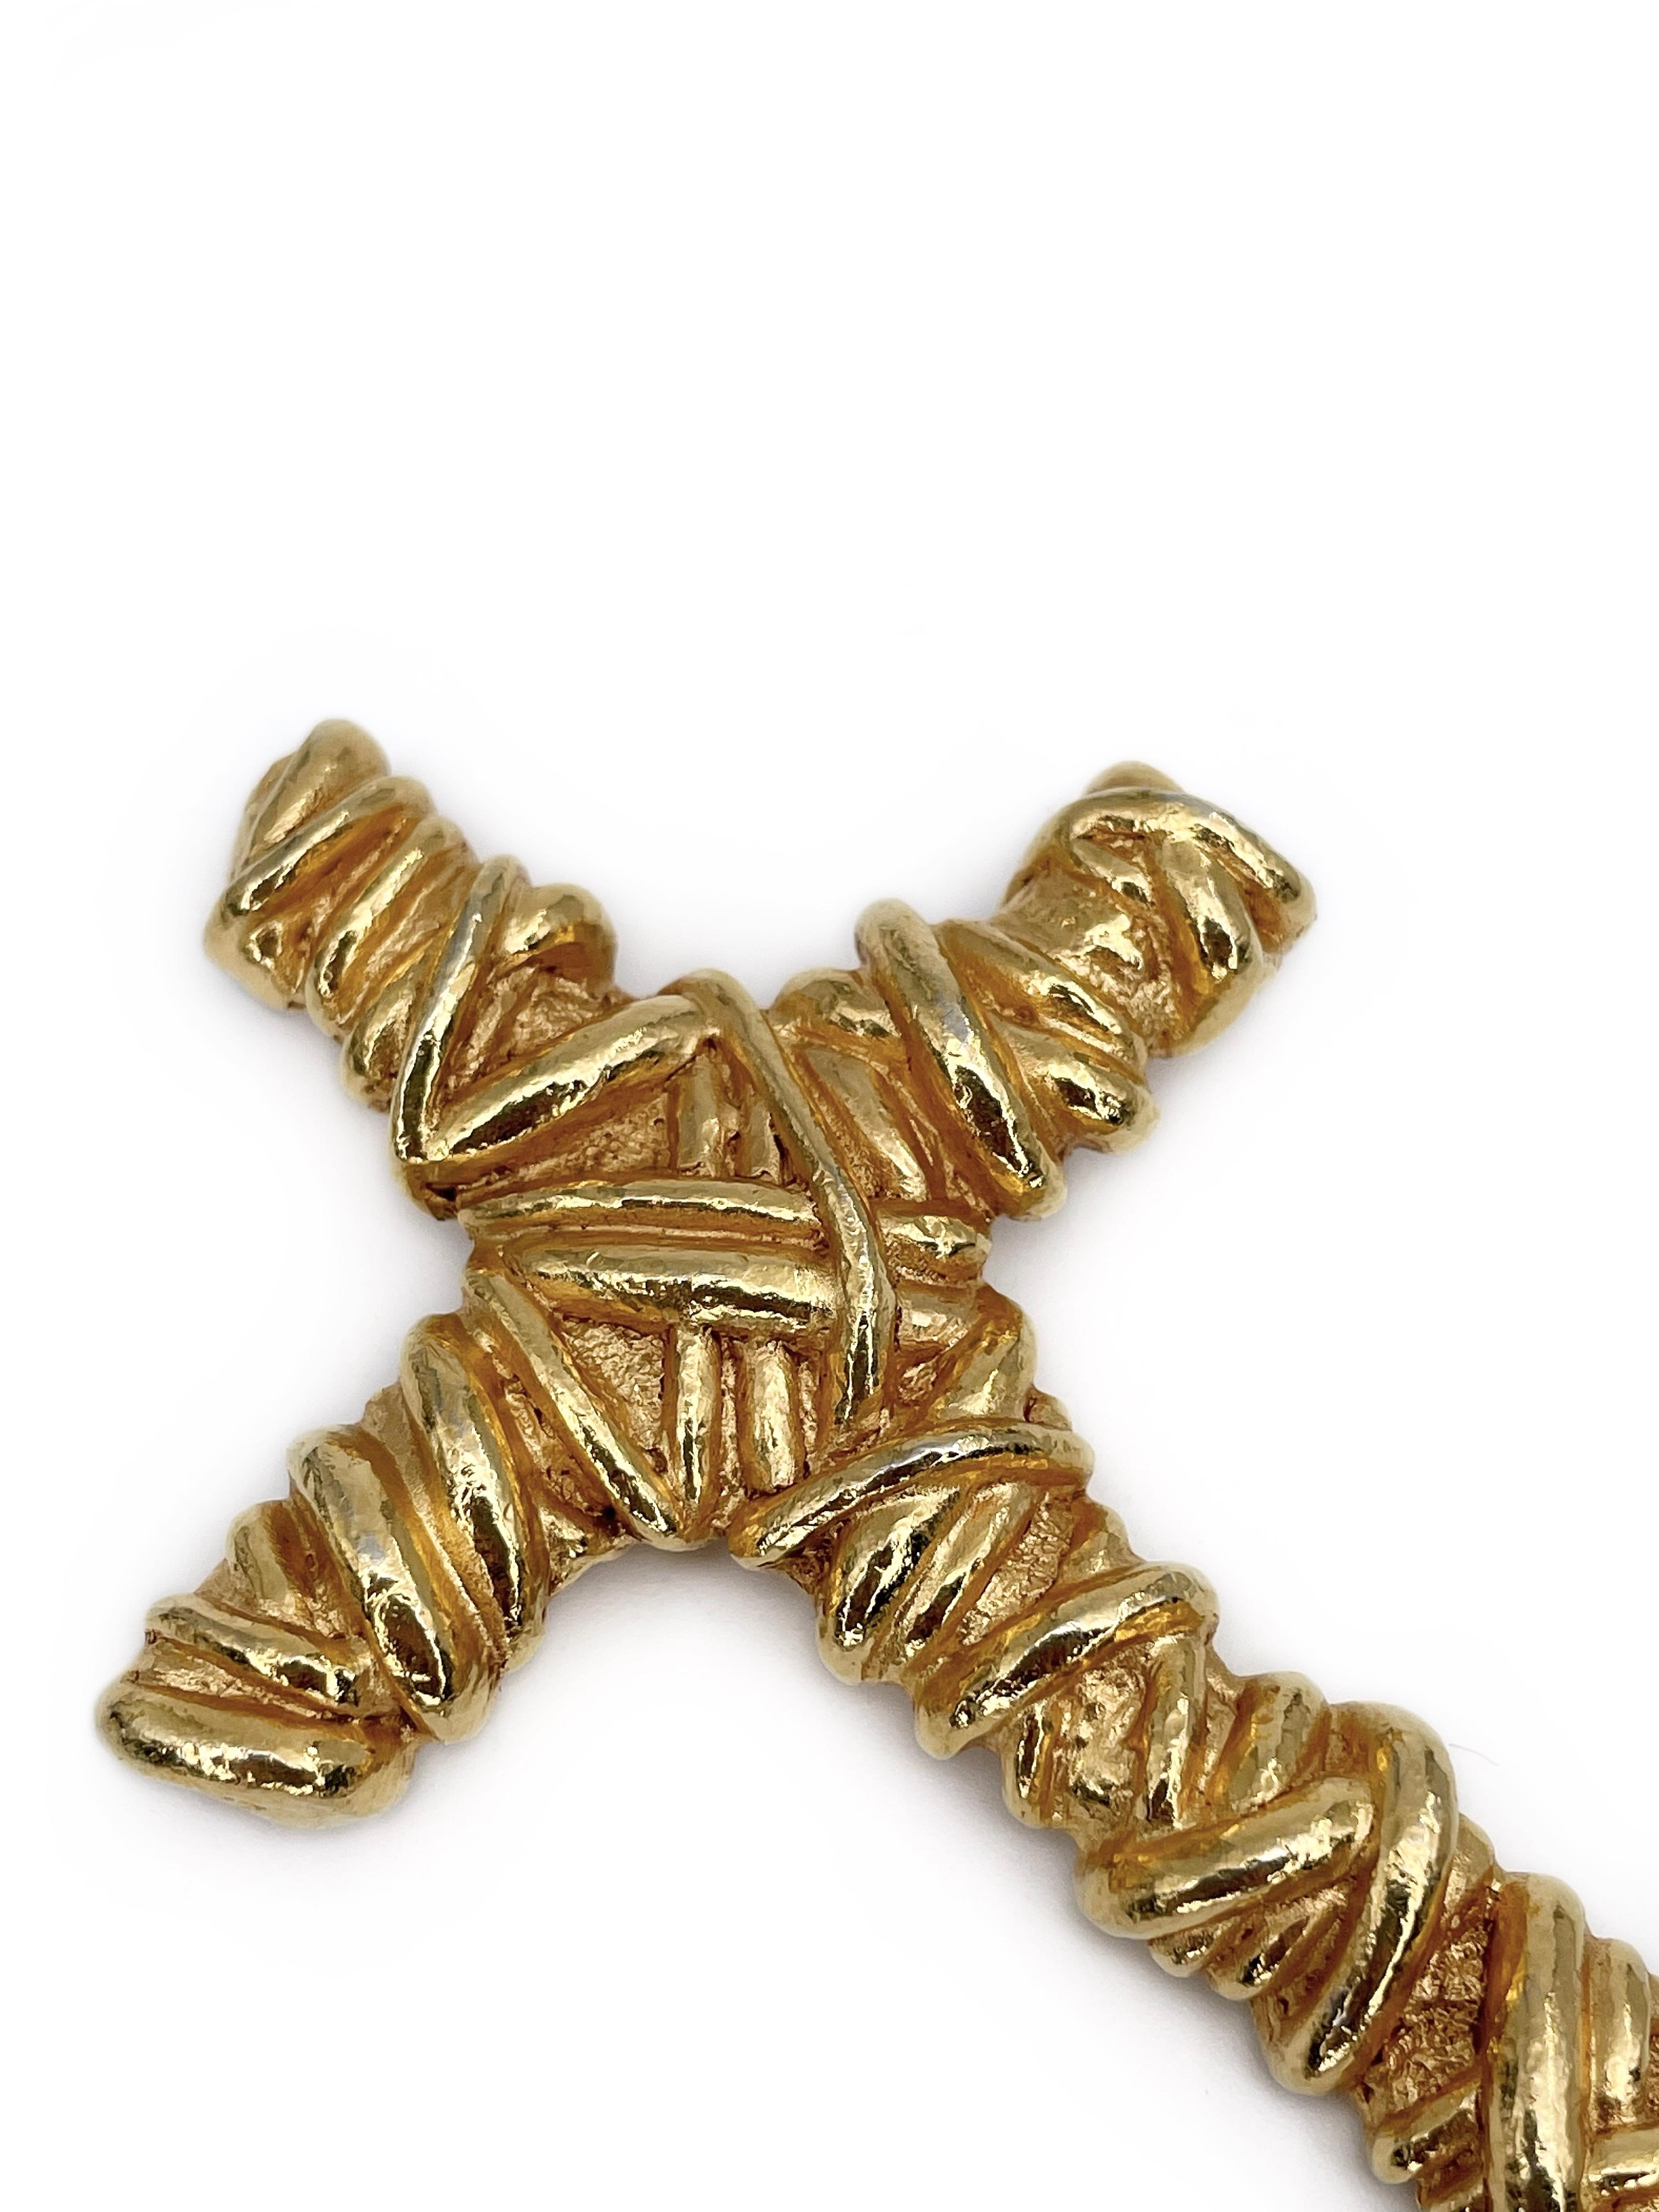 1994 Vintage Christian Lacroix Gold Tone Cross Pin Brooch In Good Condition For Sale In Vilnius, LT